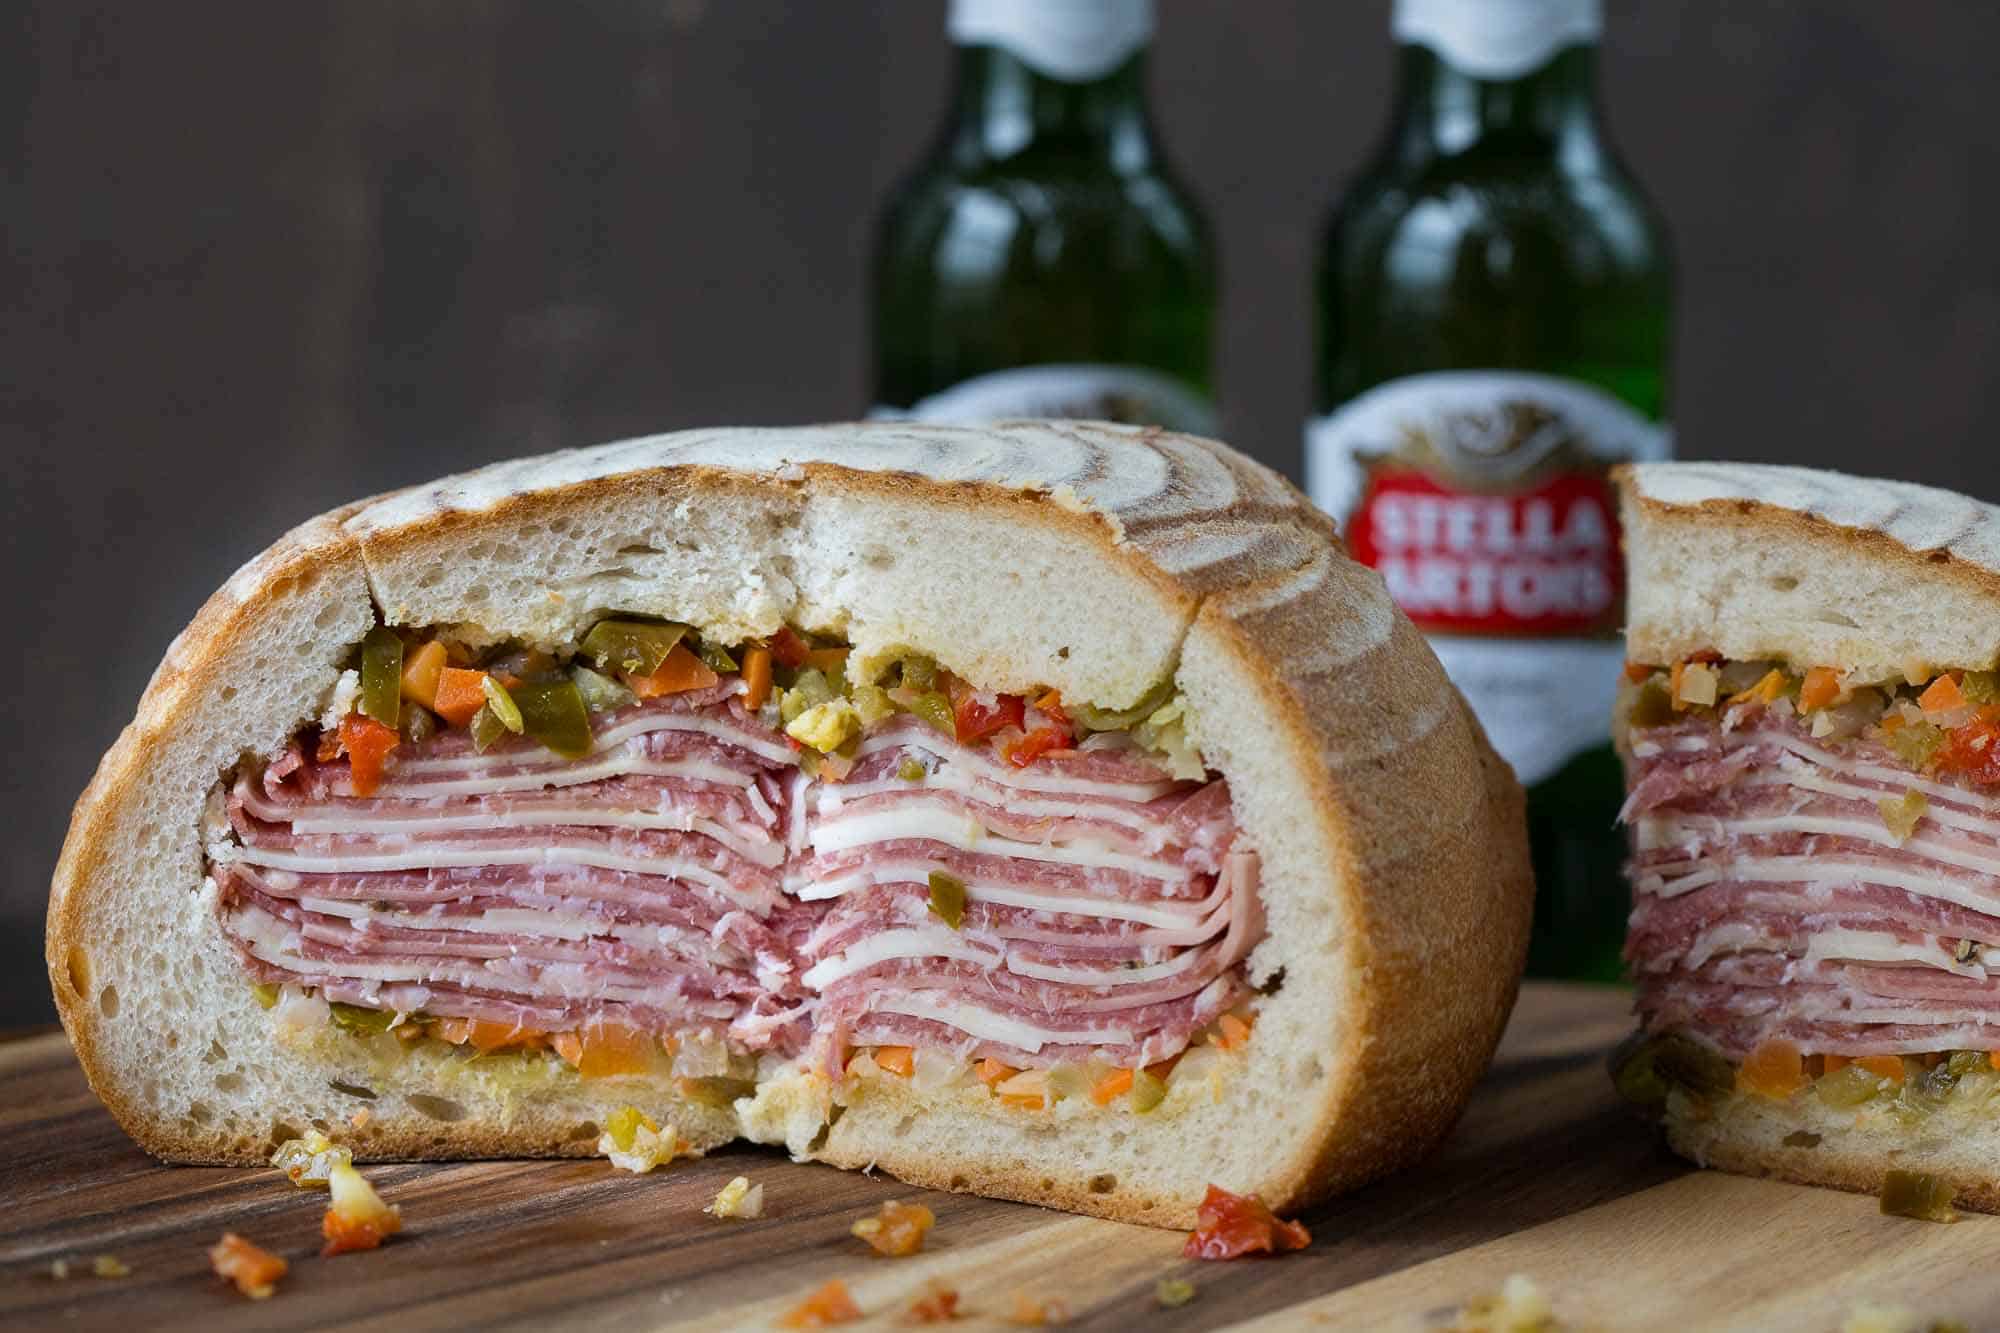 gigantic muffaletta cut open with bottles of beer in the background.